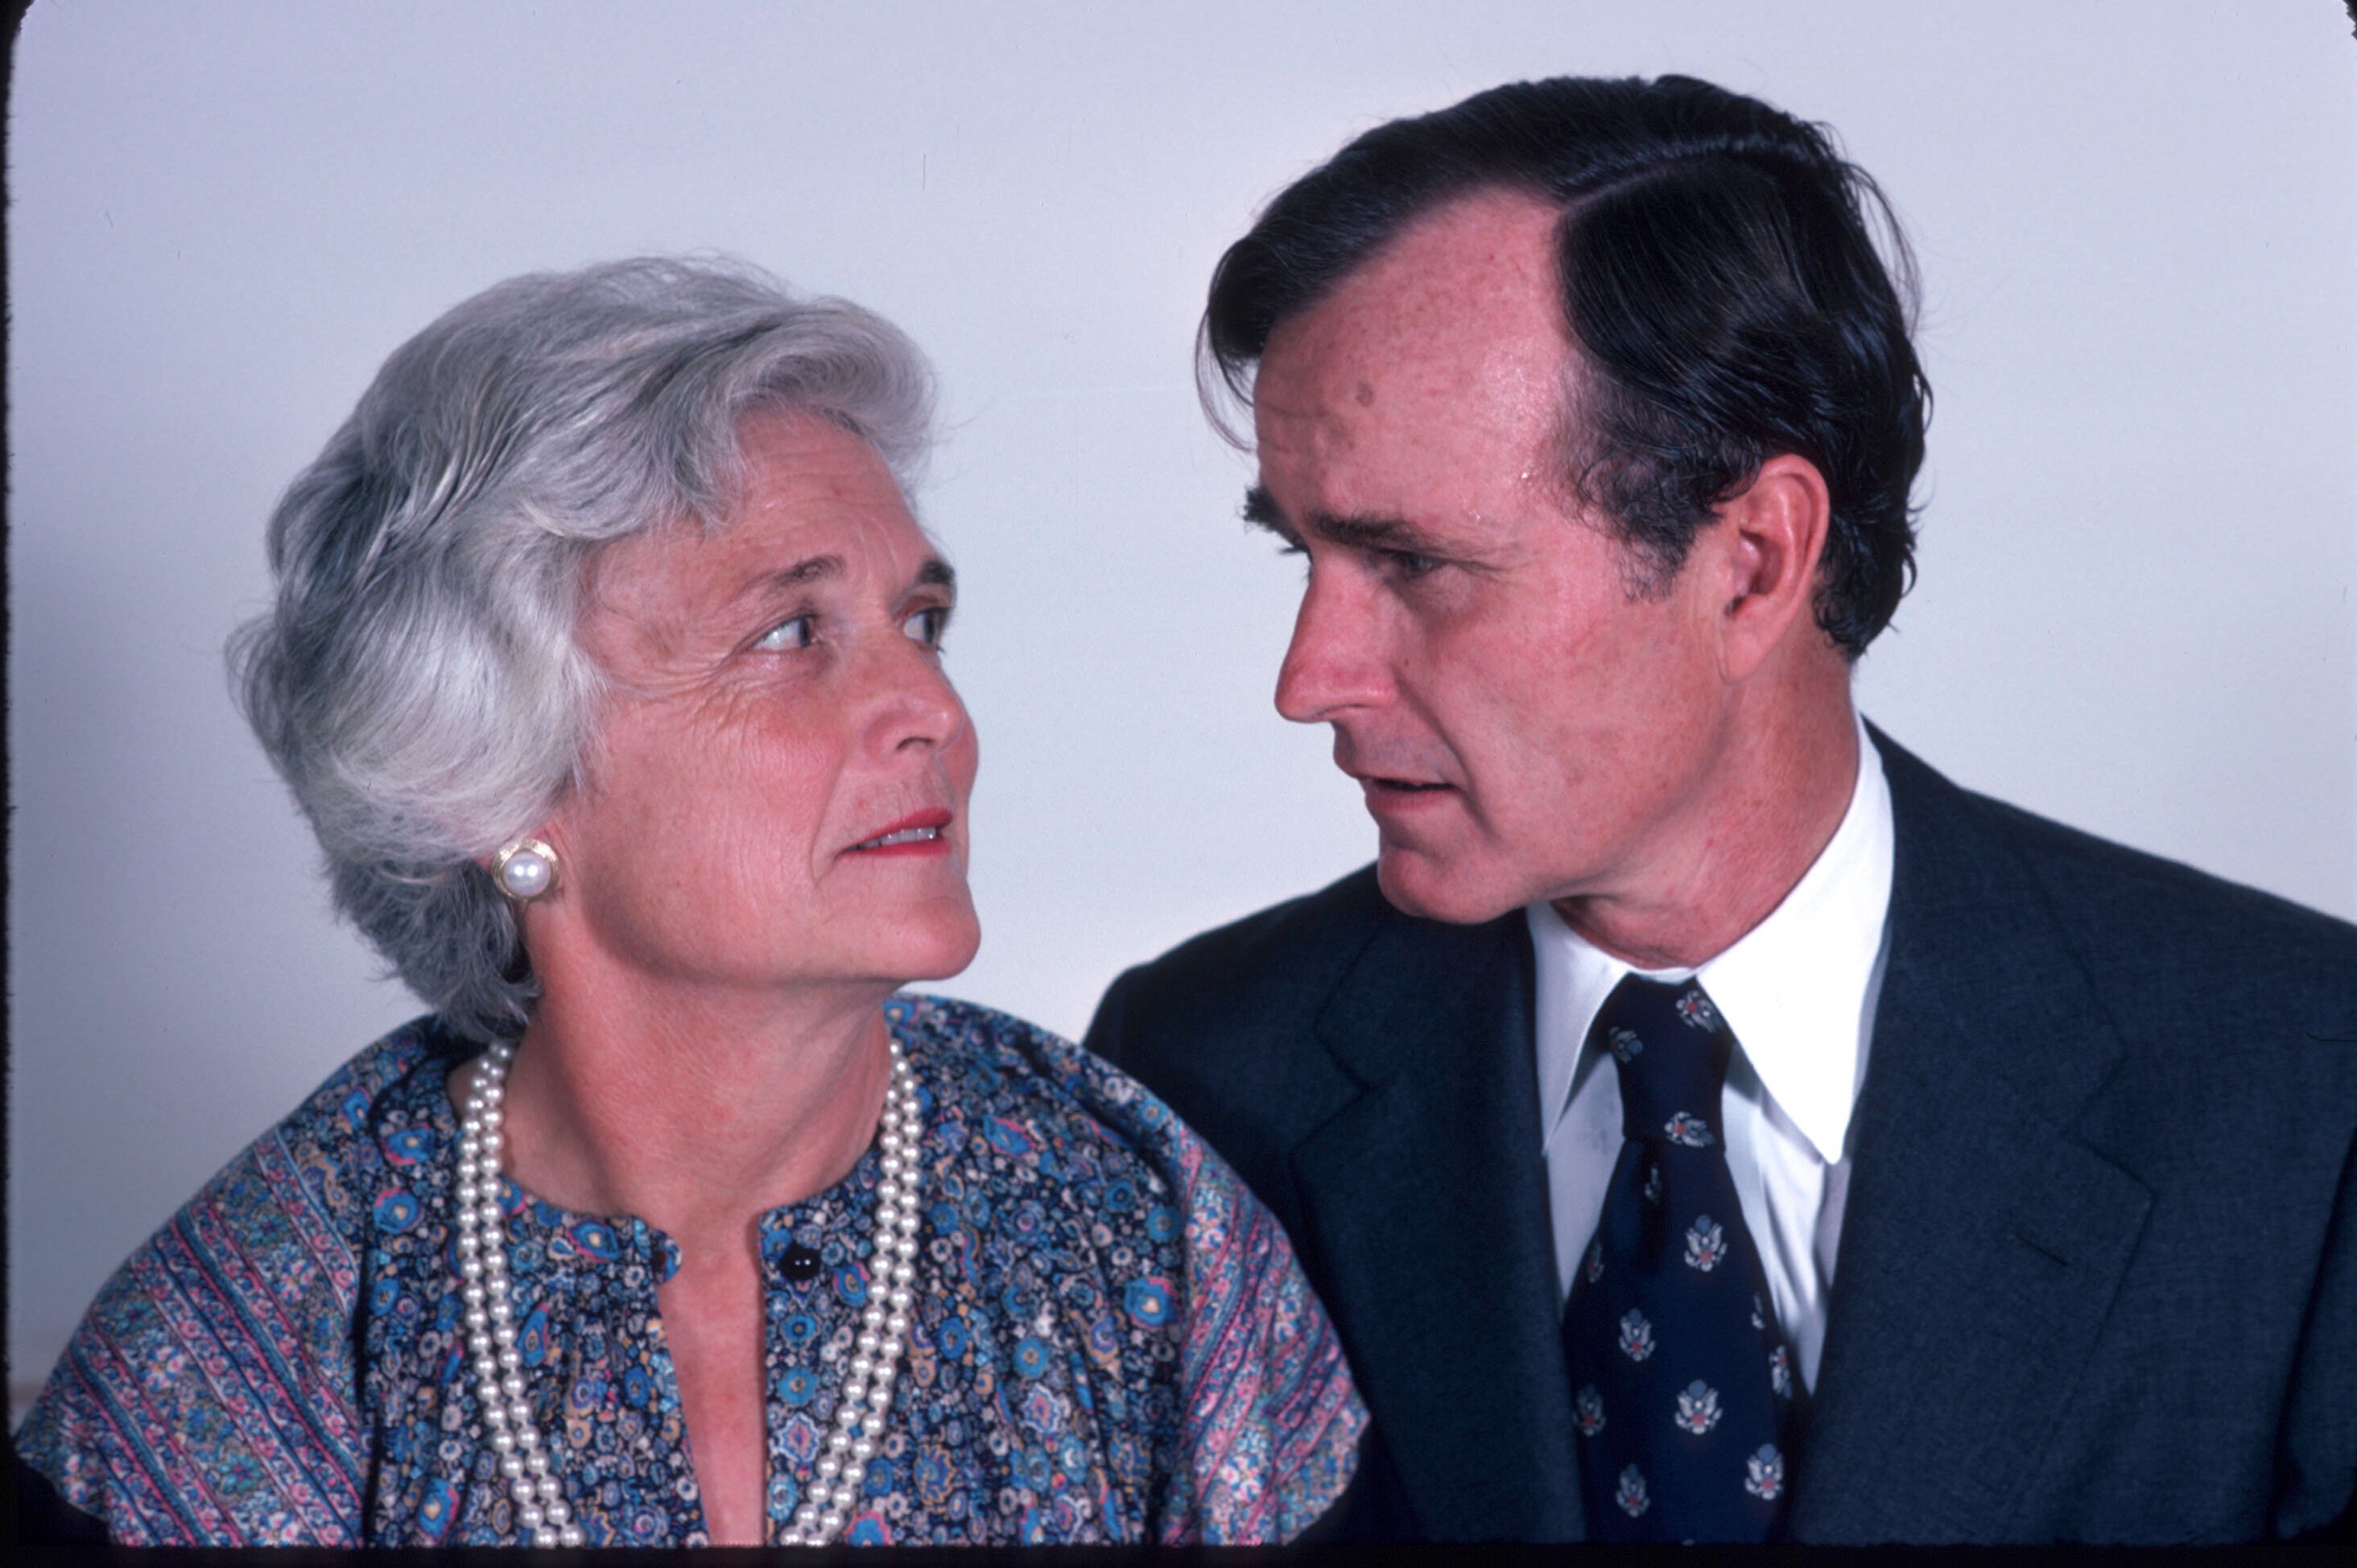 Barbara and George Bush on November 1, 1978, in Houston, Texas. | Source: Getty Images